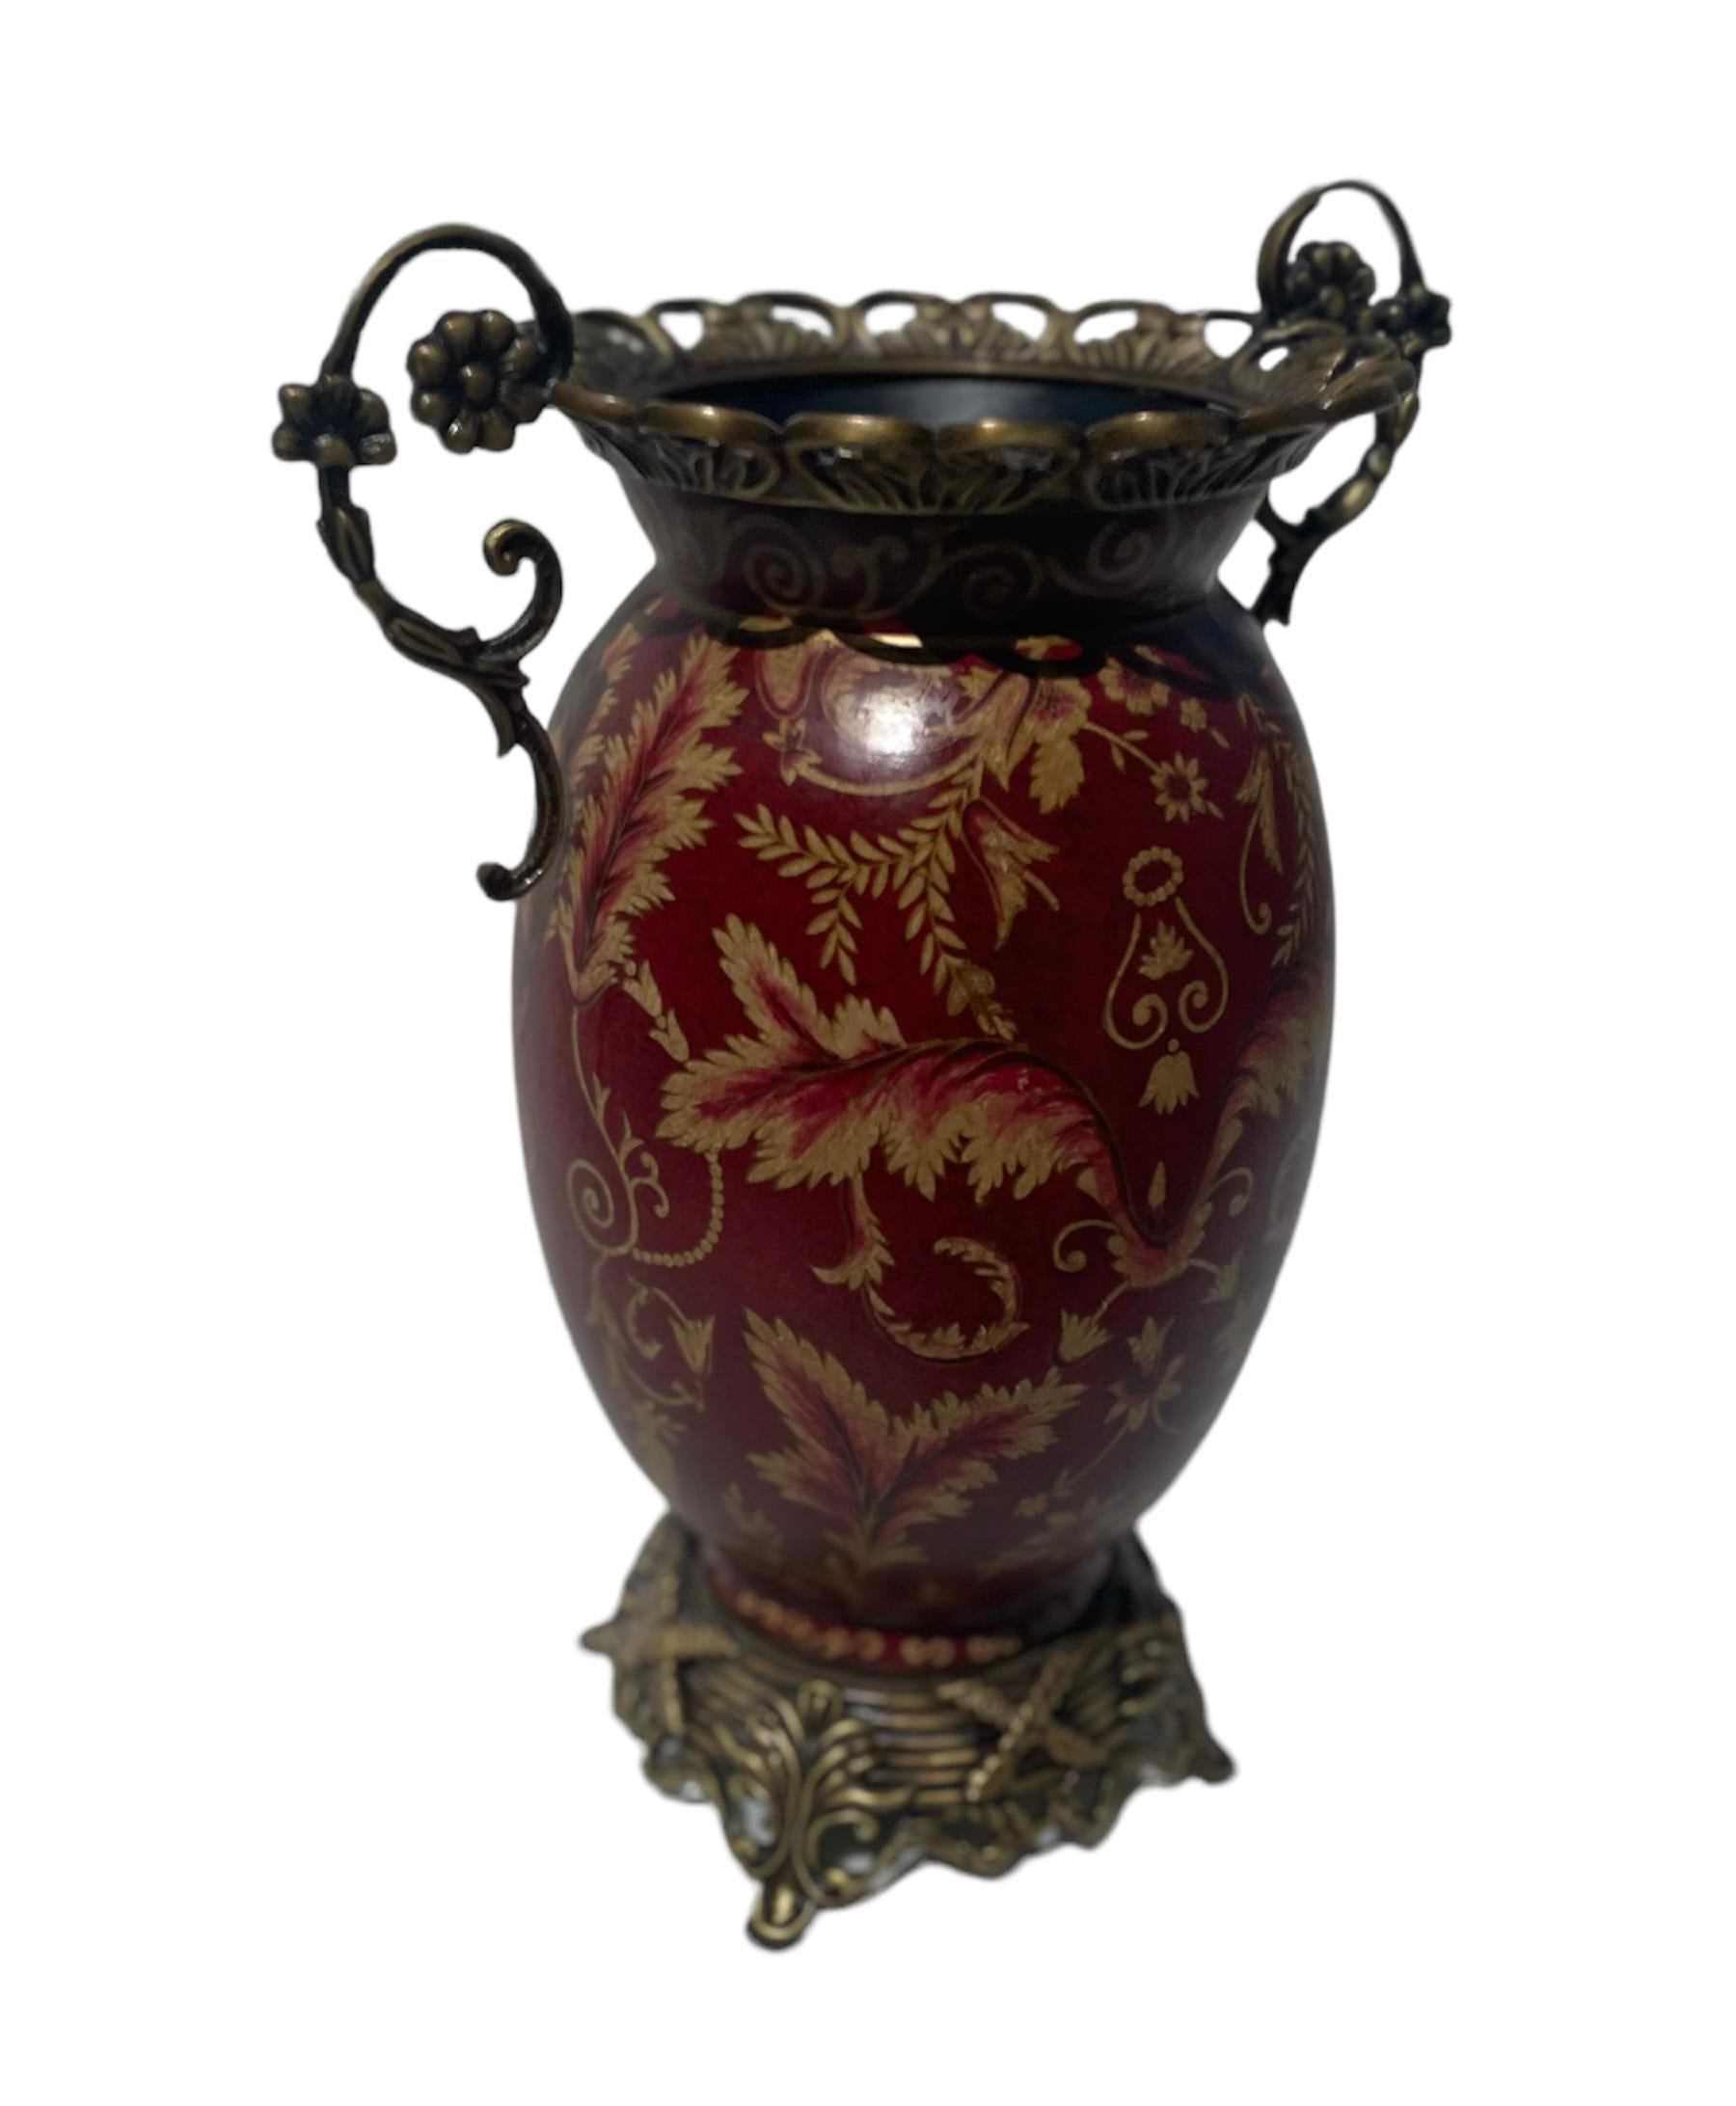 Rococo Revival Decorative Red Vase with Gold and with Two Handles